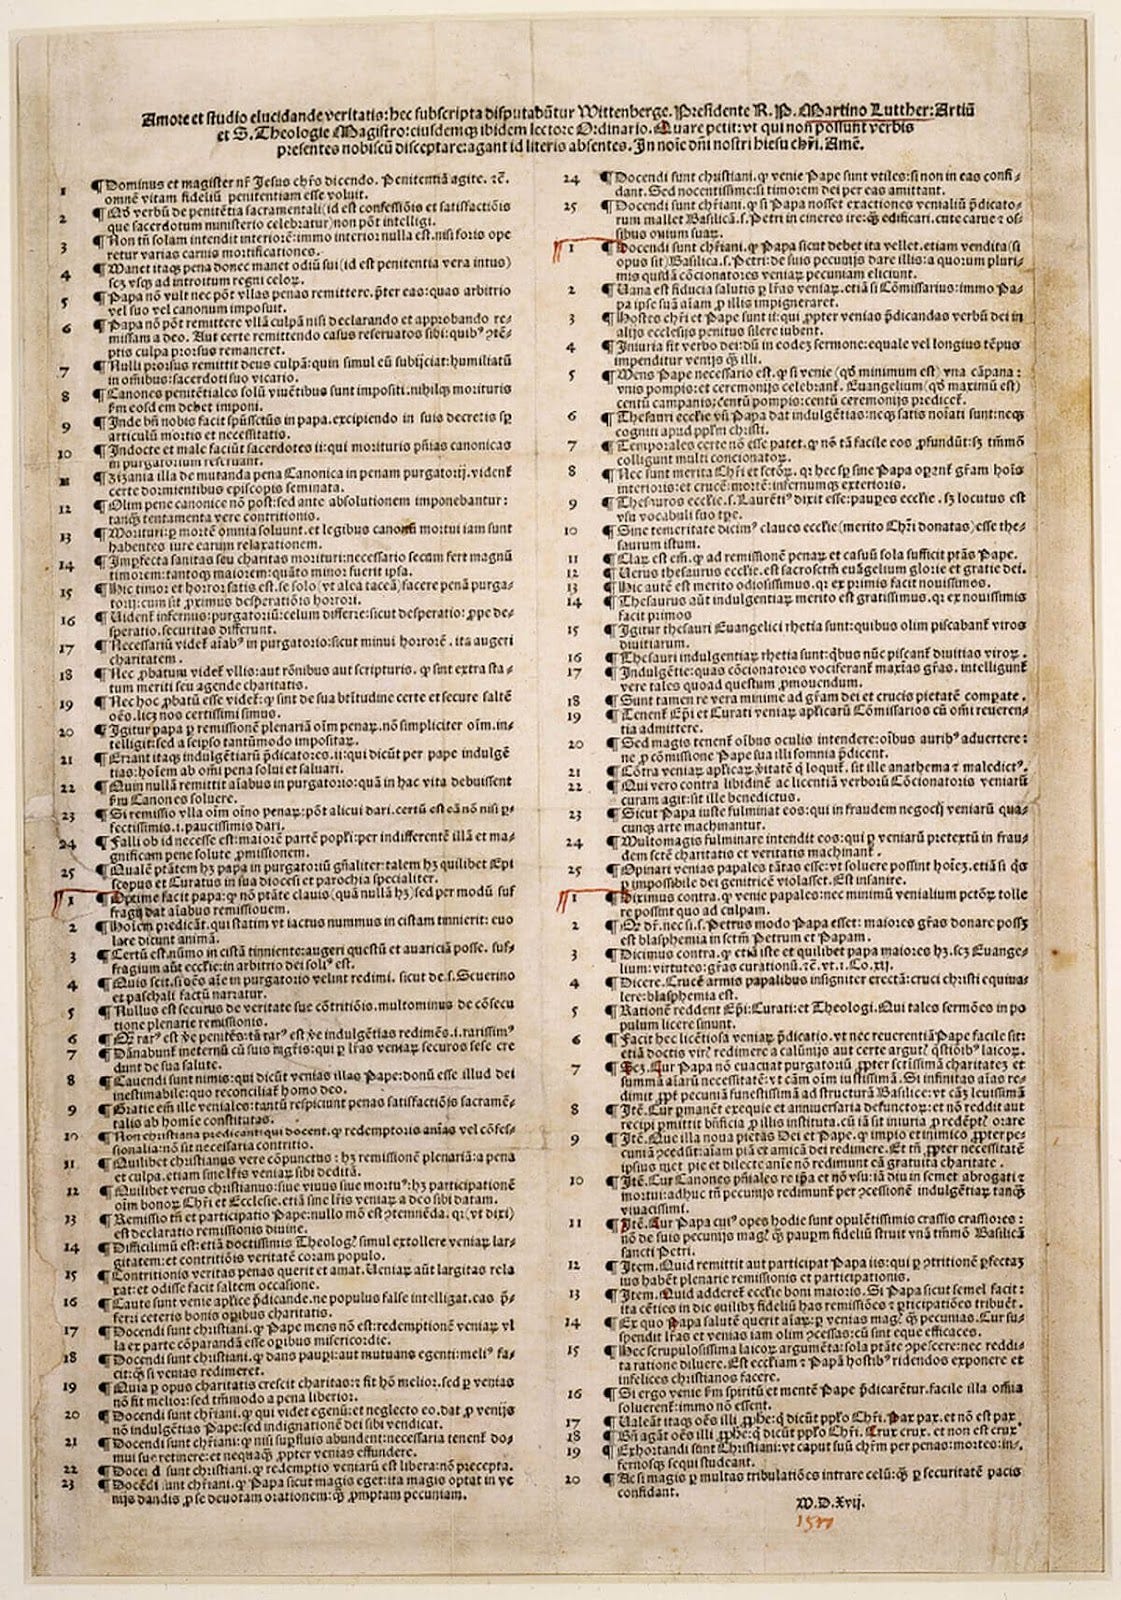 1517 copy of Martin Luther's 95 theses, the publication of which began the Protestant Reformation in Europe